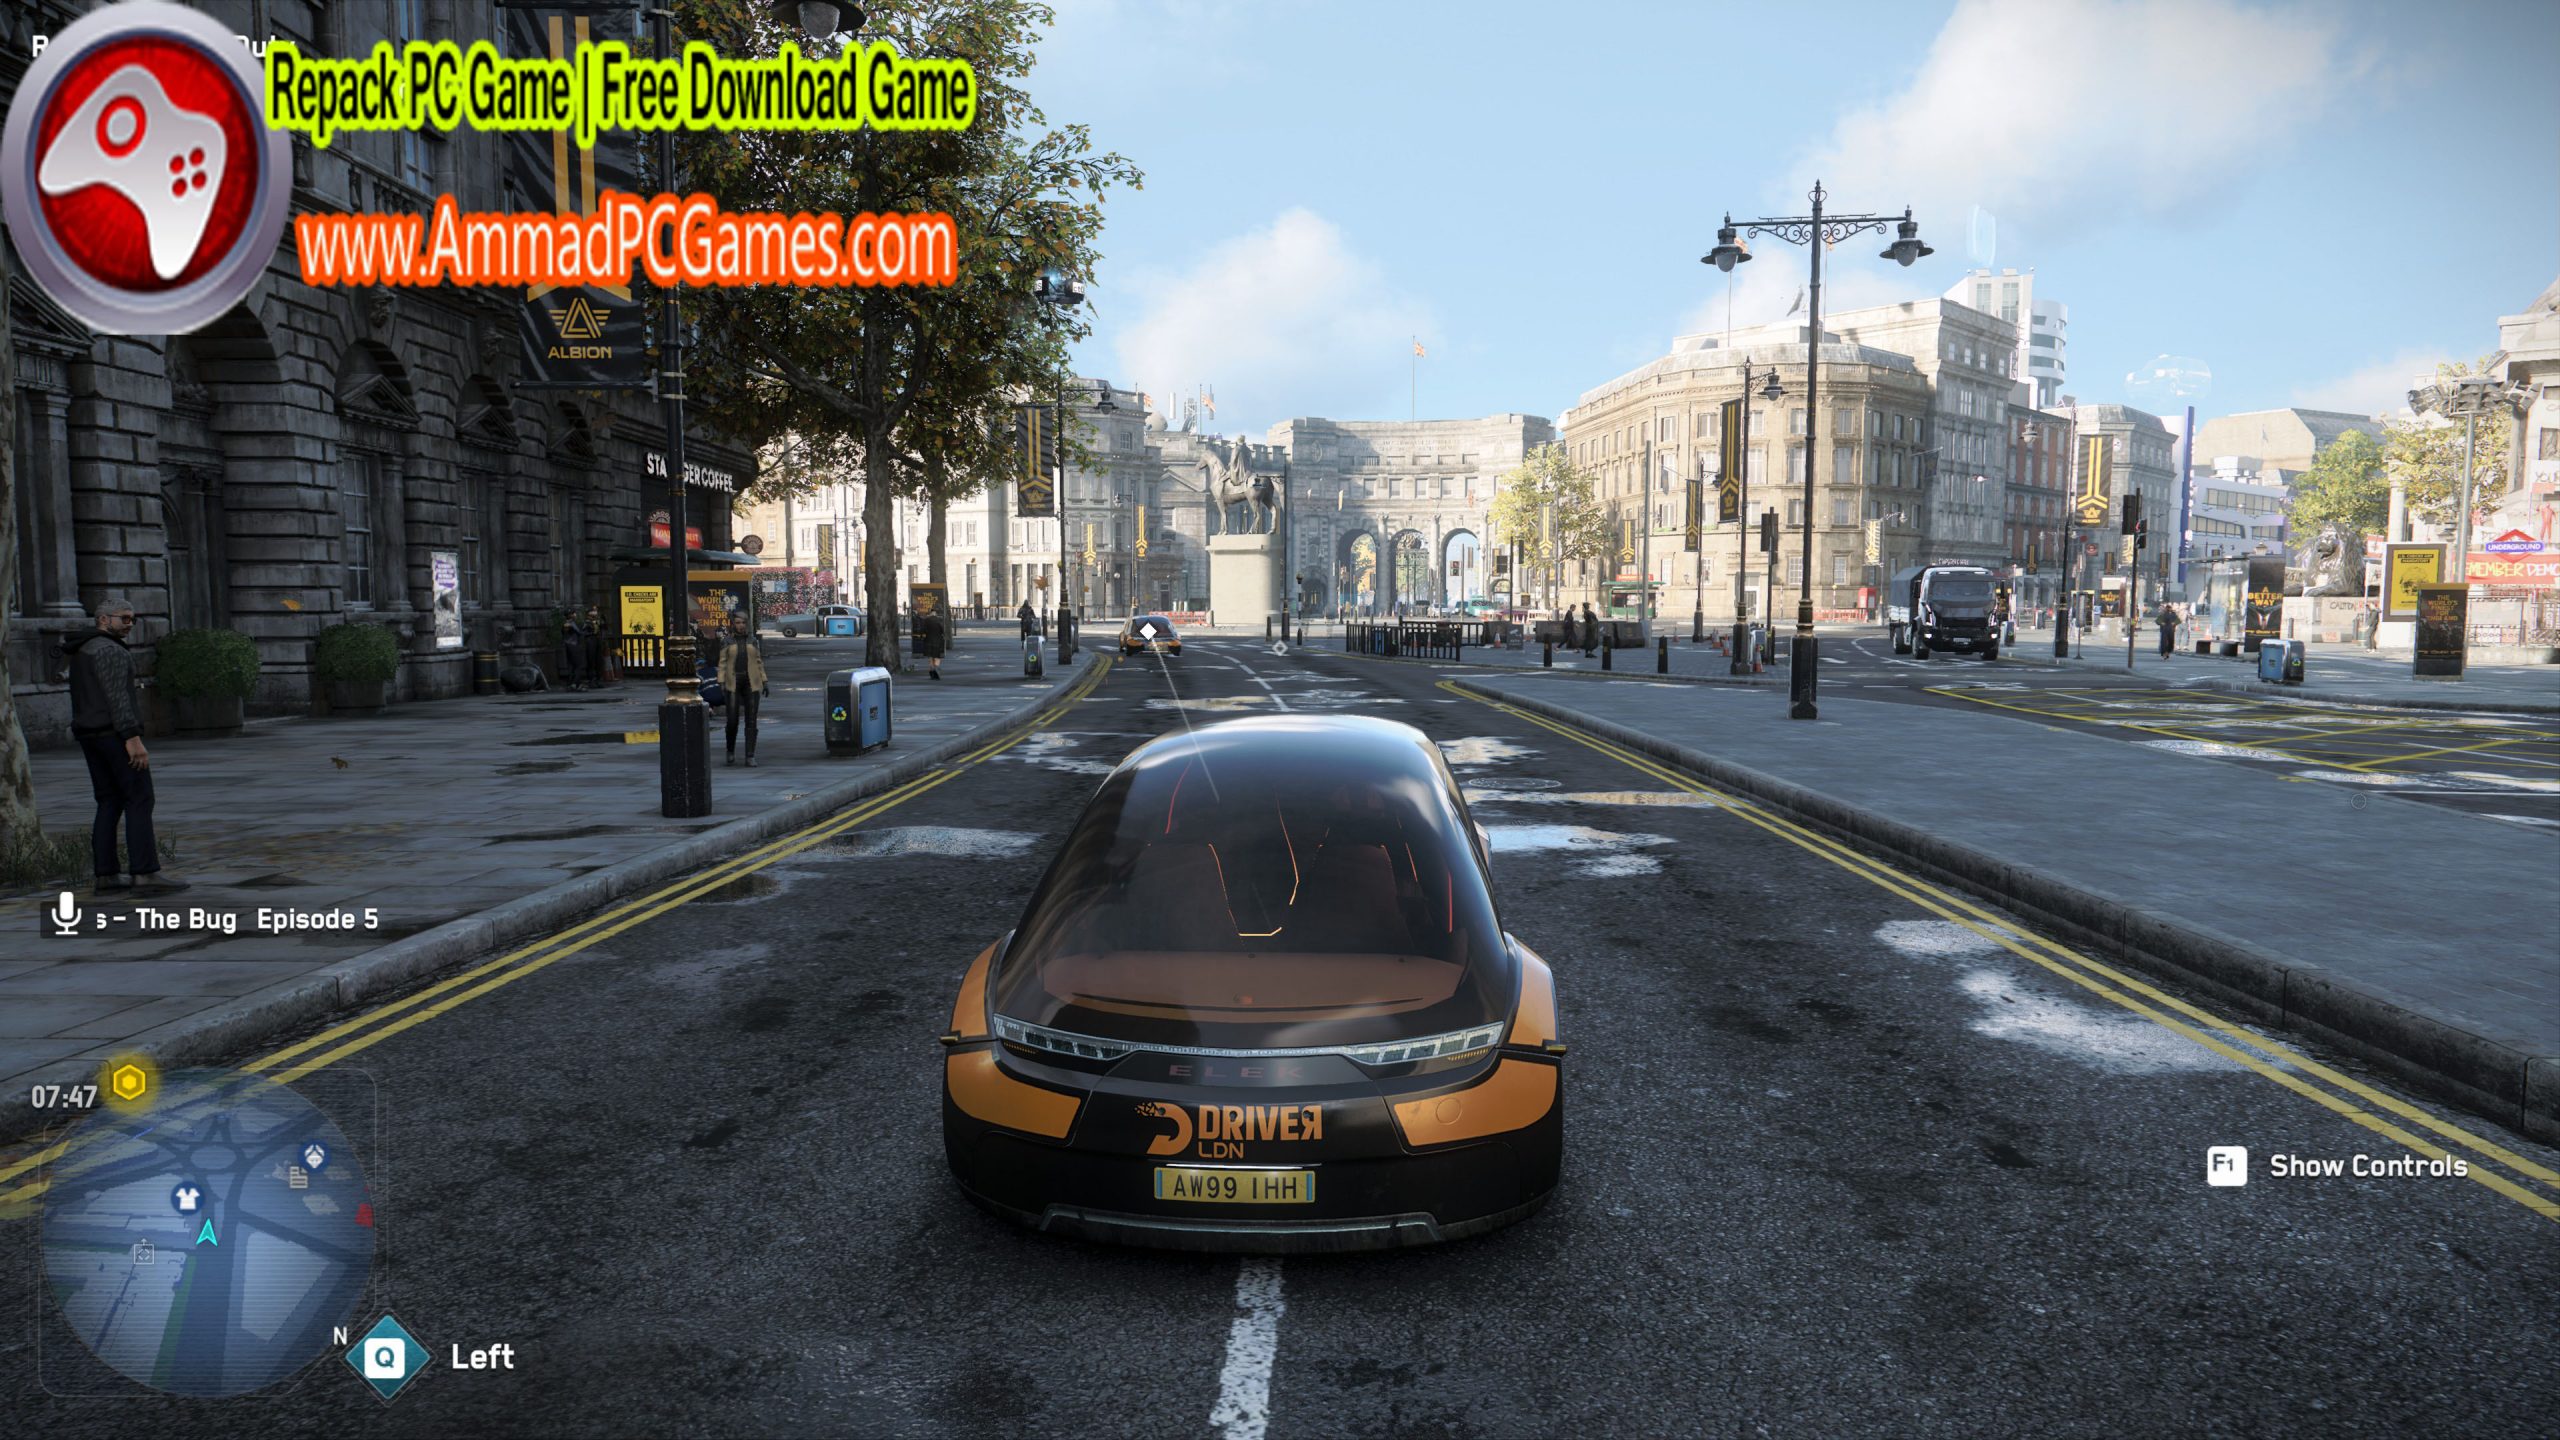 Watch Dogs v 1.0 Free Download